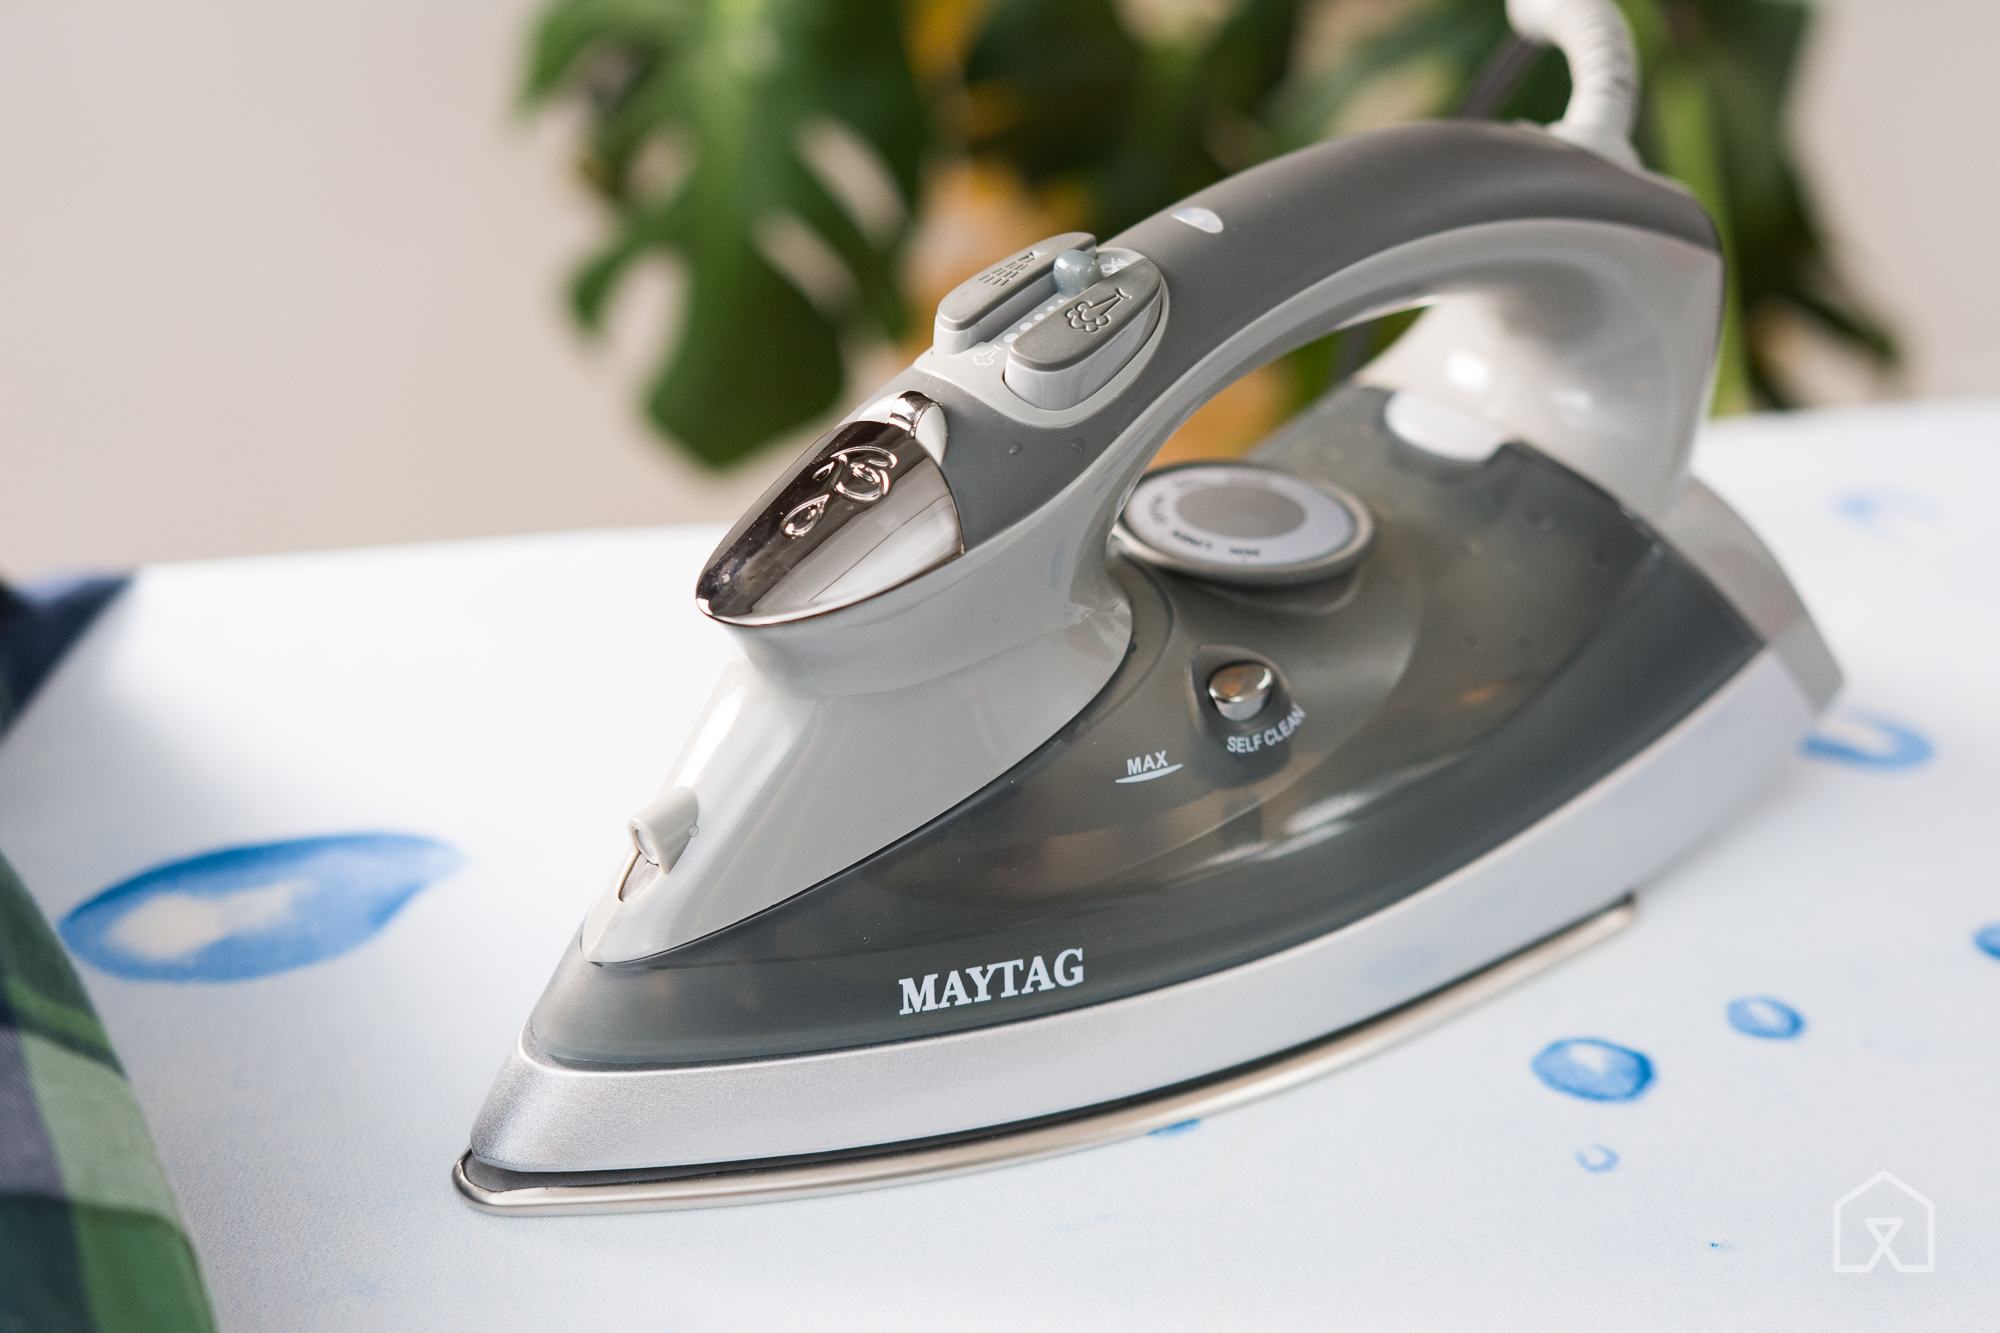 best rated clothes iron